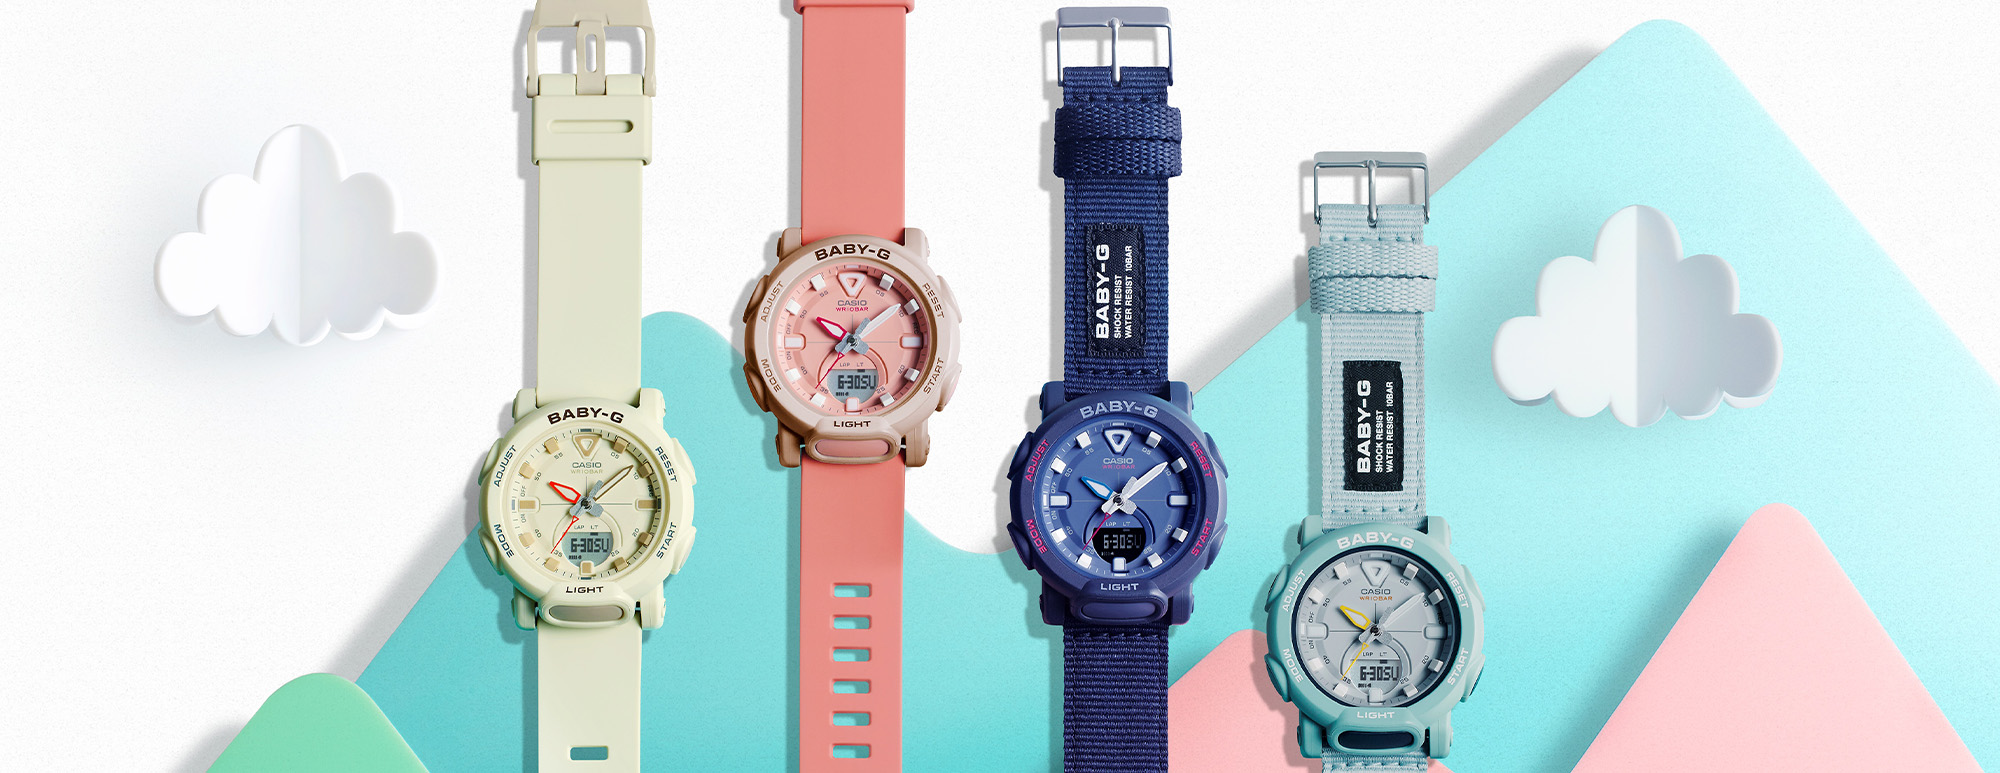 The Casio BABY-G BGA-310 series, in 6 colours and a familiar round face  that lights up in the dark